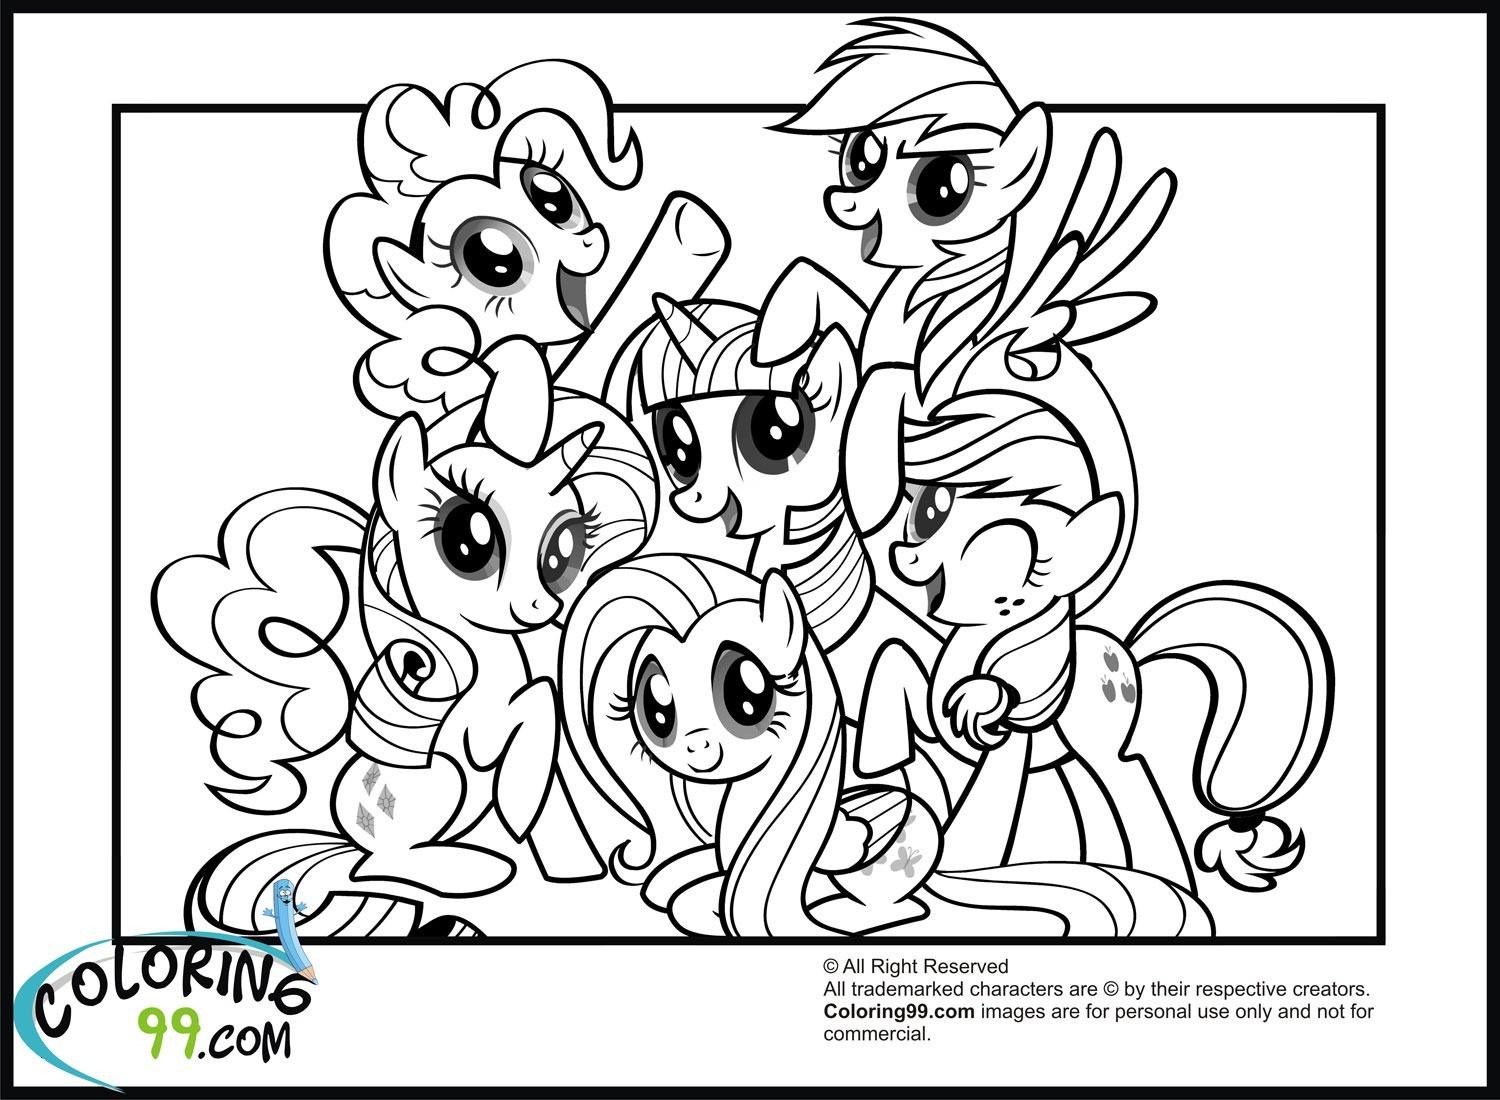 My Little Pony Friendship is Magic Coloring Page